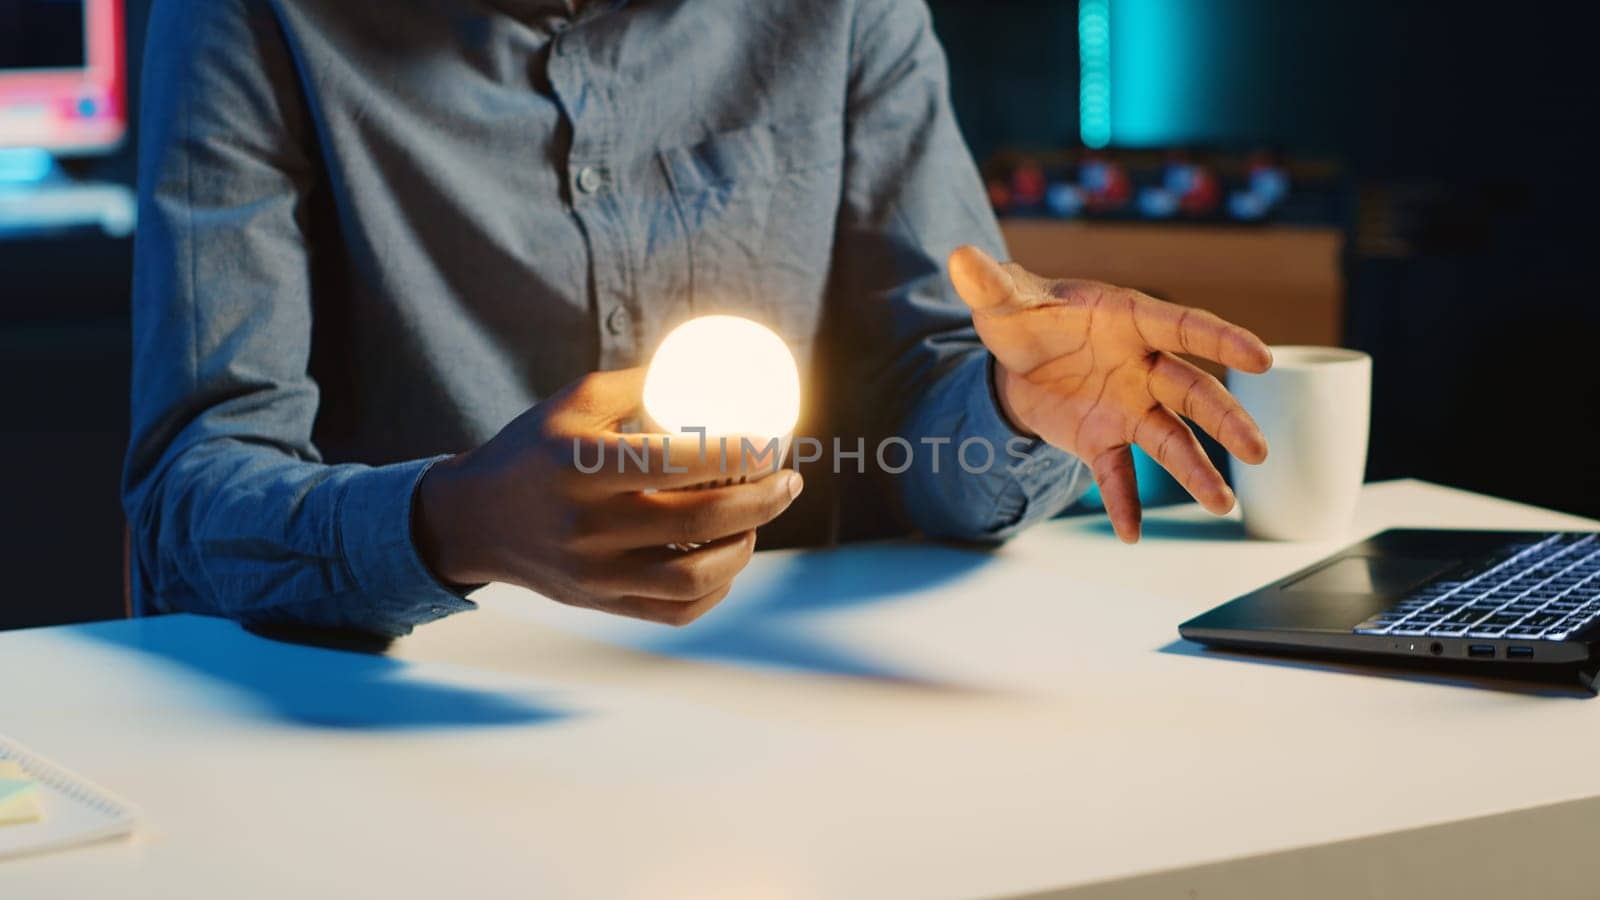 African american content creator in dimly lit living room uses camera to film light bulb review for online streaming platforms. Media star hosts internet show, unboxing smart home technology